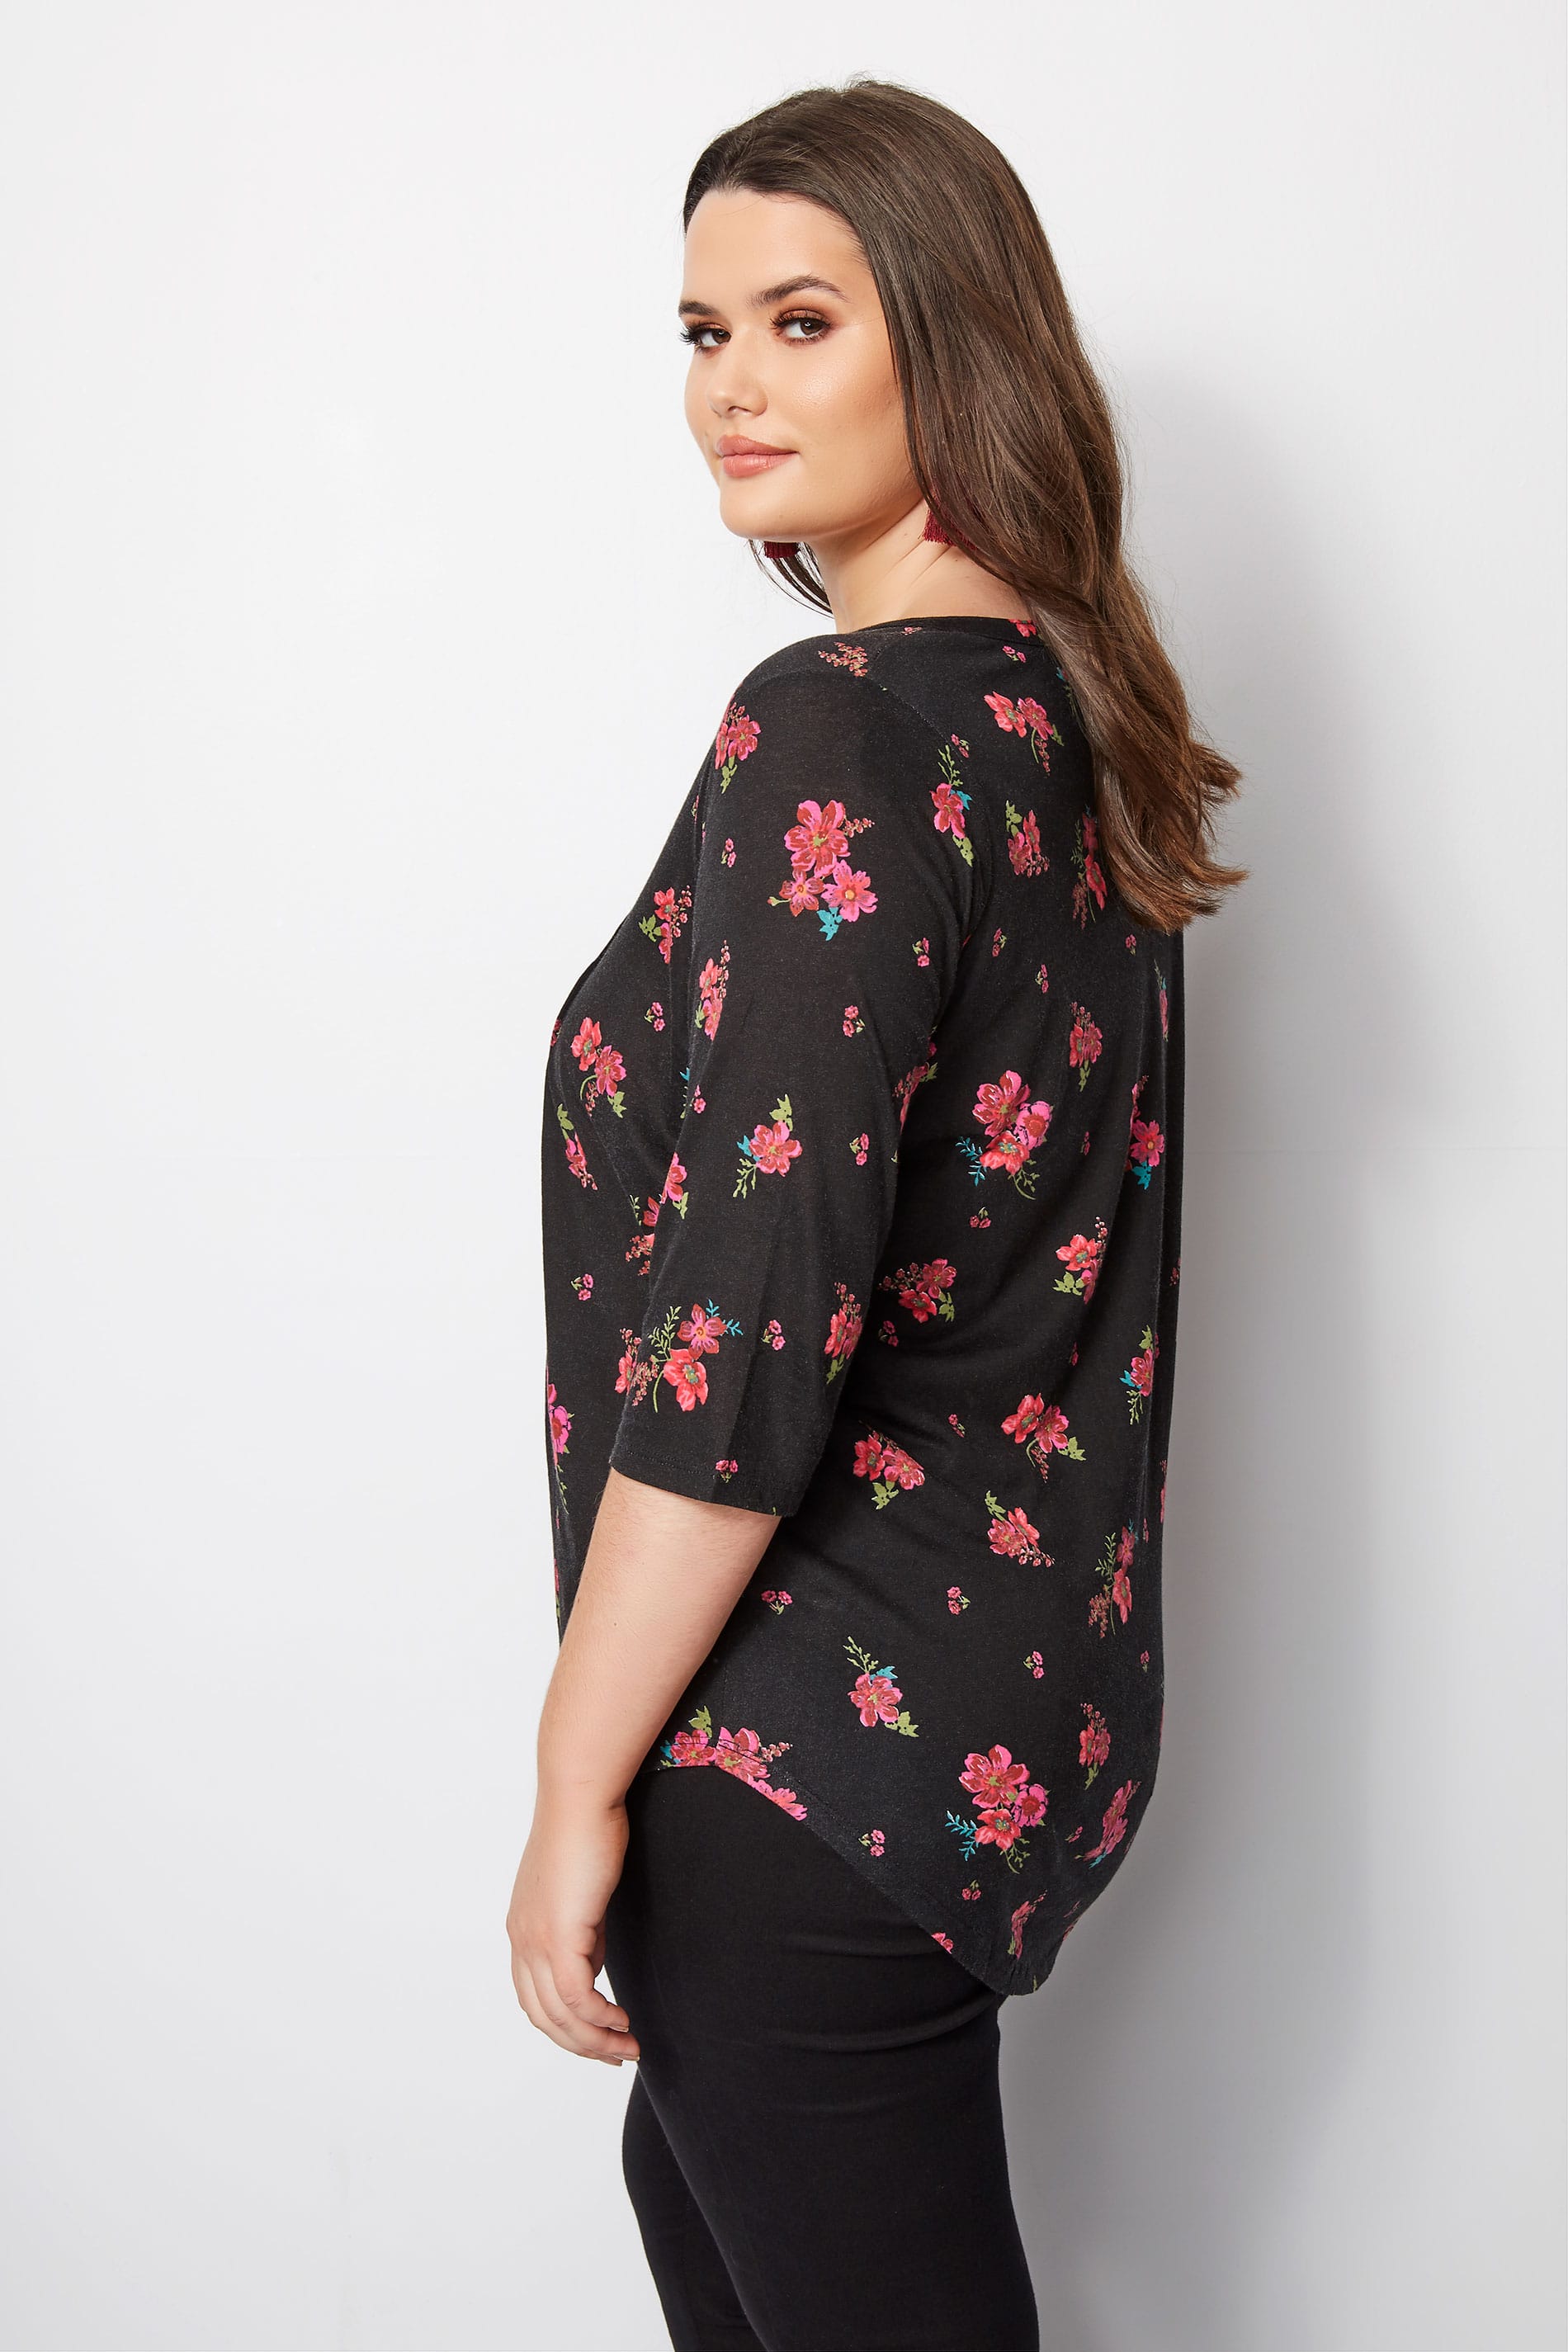 Black Floral Pintuck Jersey Top, Plus size 16 to 36 | Yours Clothing